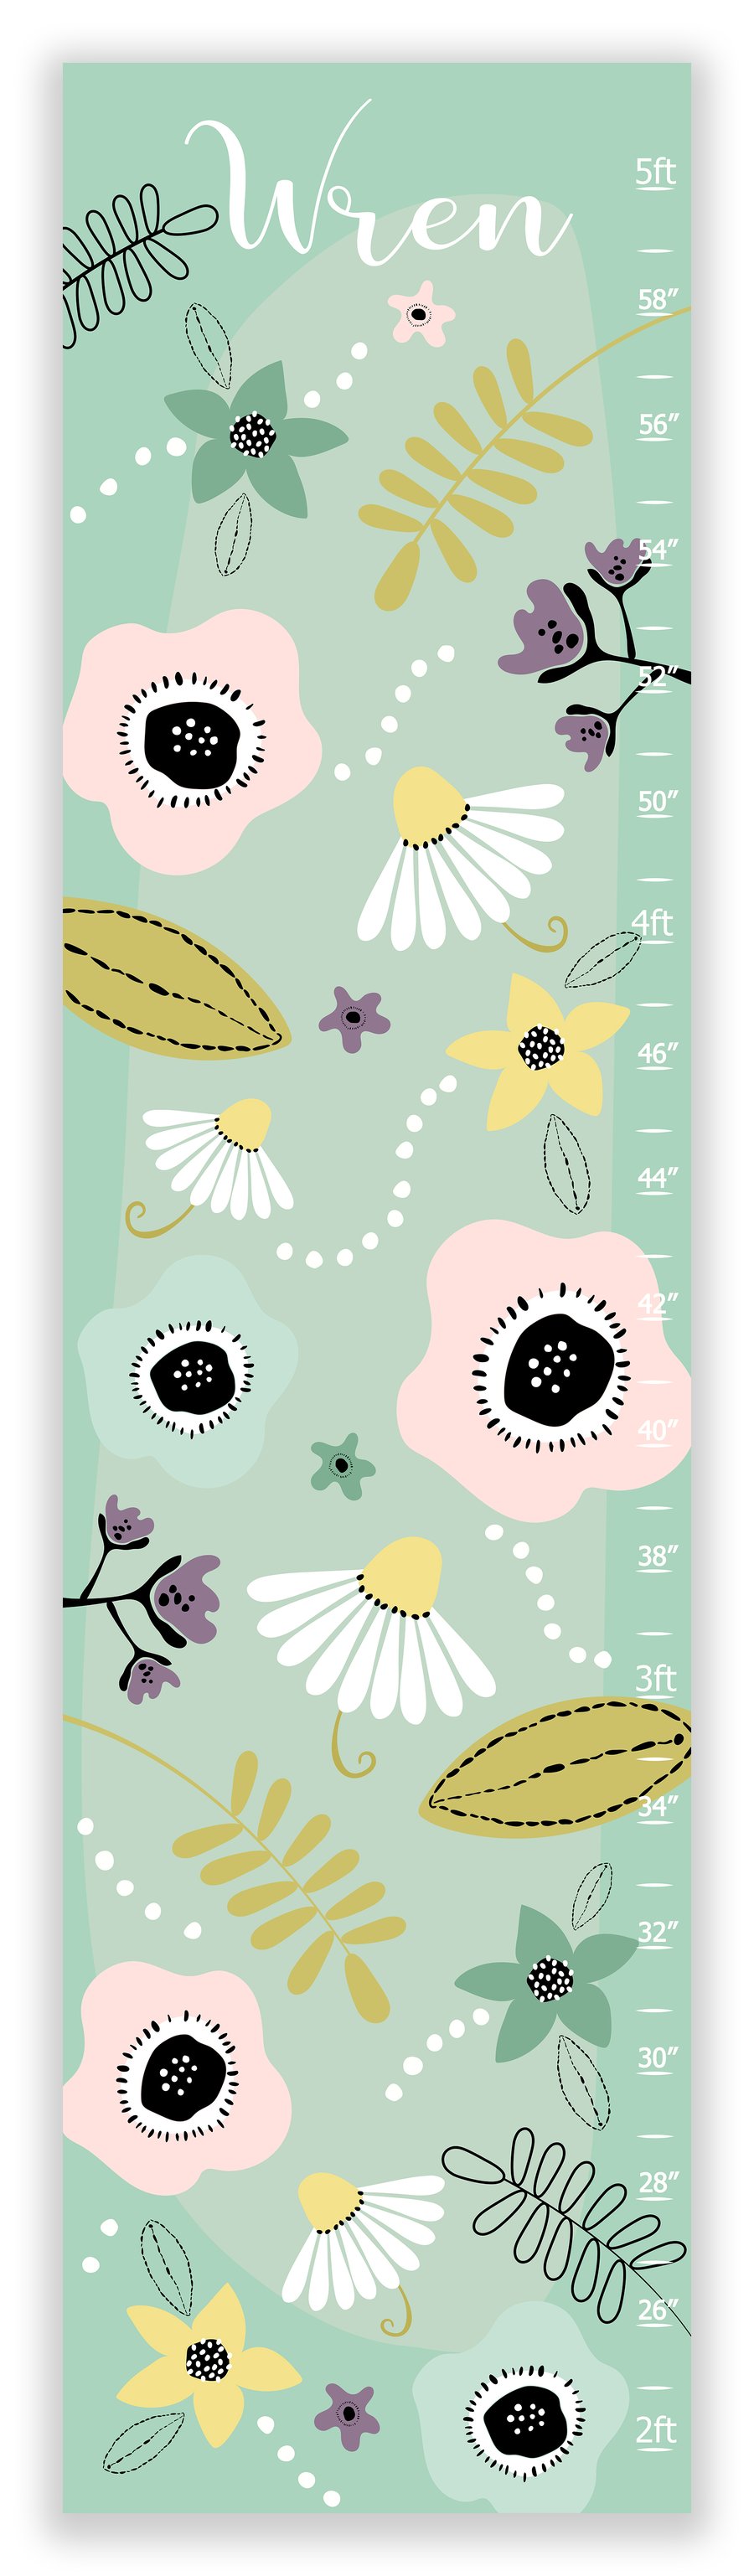 Image of Modern Boho Mint Floral Personalized Canvas Growth CHart